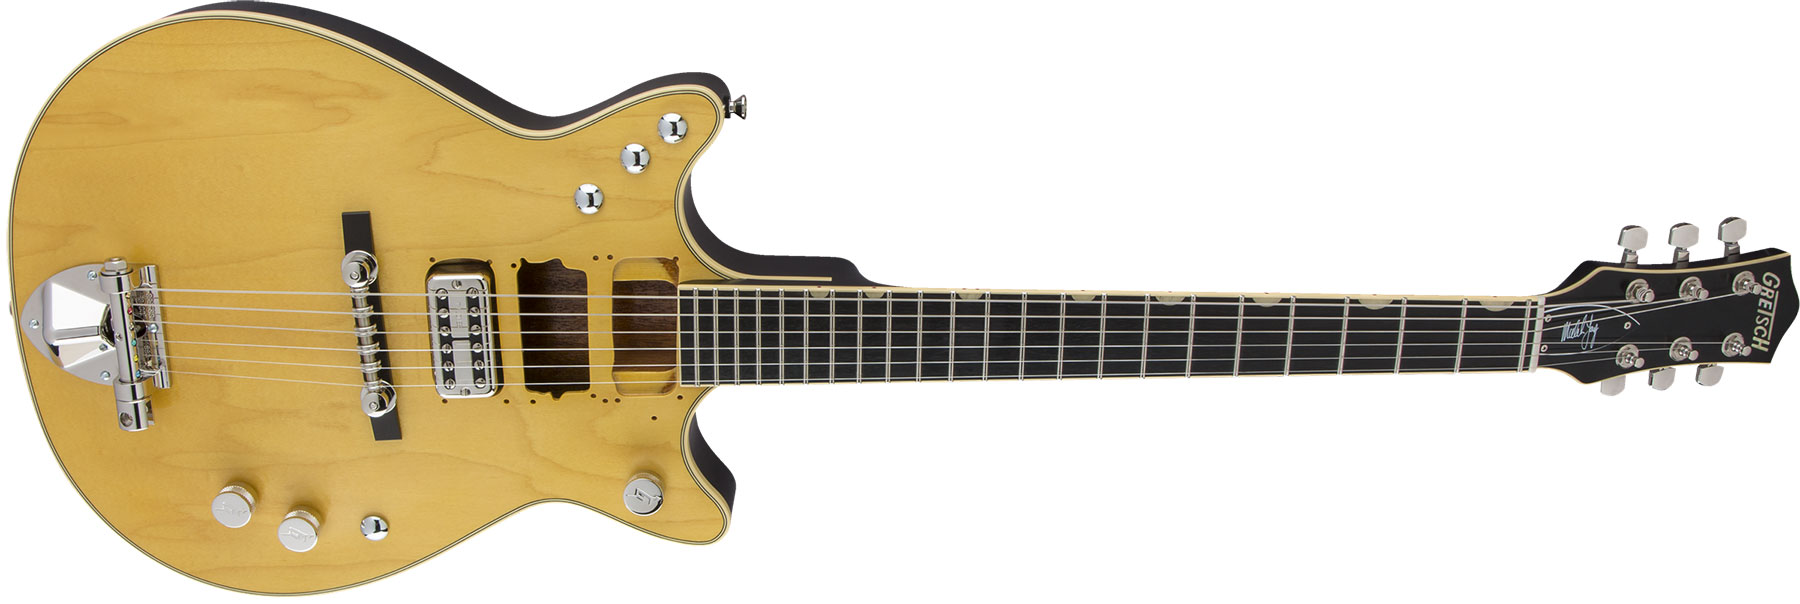 Gretsch Malcolm Young G6131-my Signature Jet Eb - Aged Natural - Double cut electric guitar - Variation 1